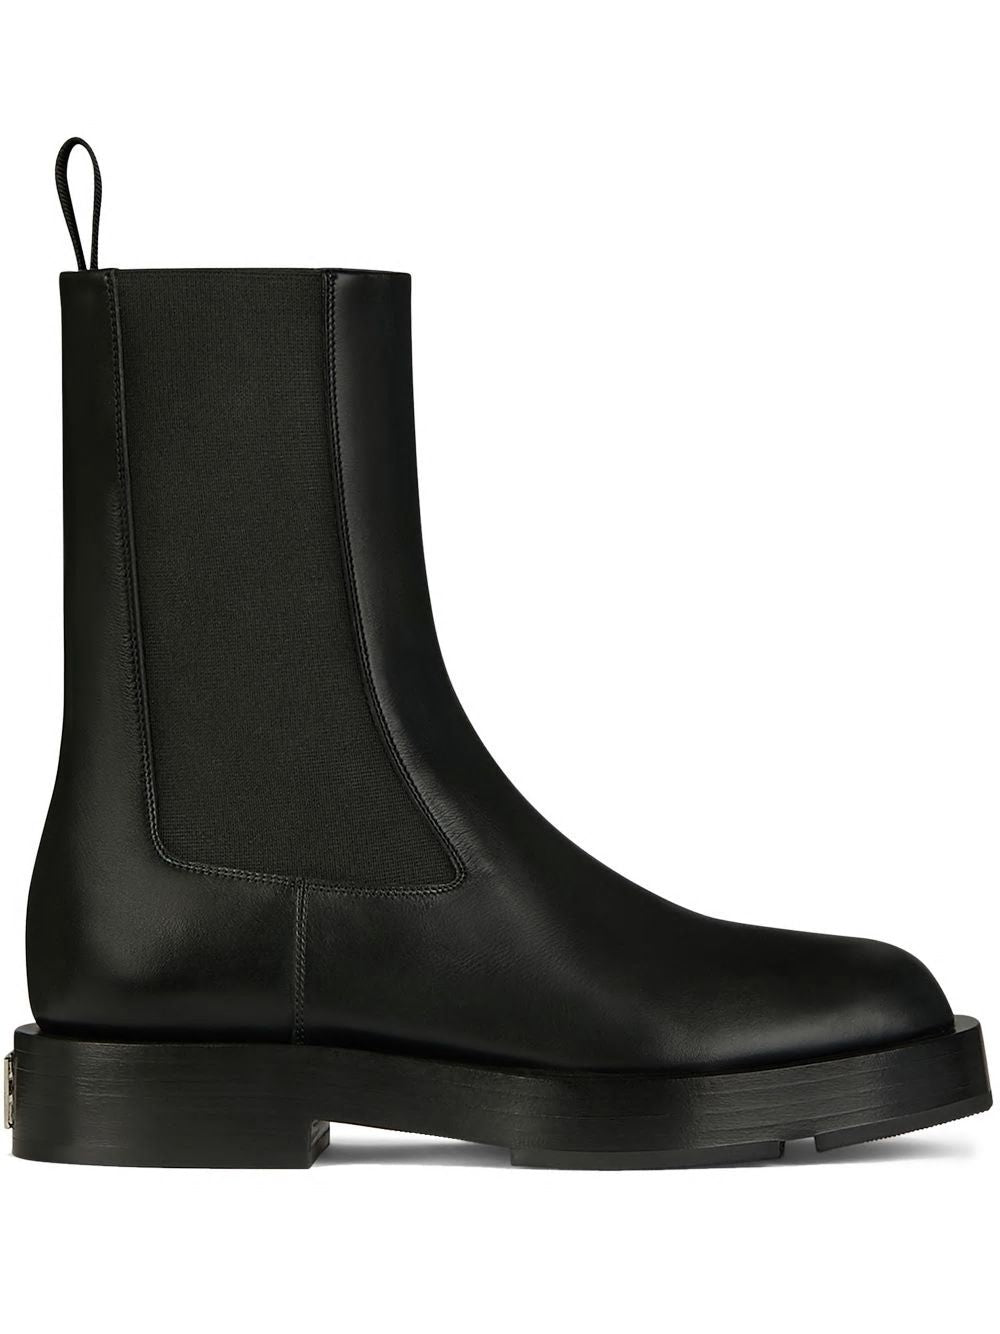 GIVENCHY Sleek and Stylish Leather Boots for Women